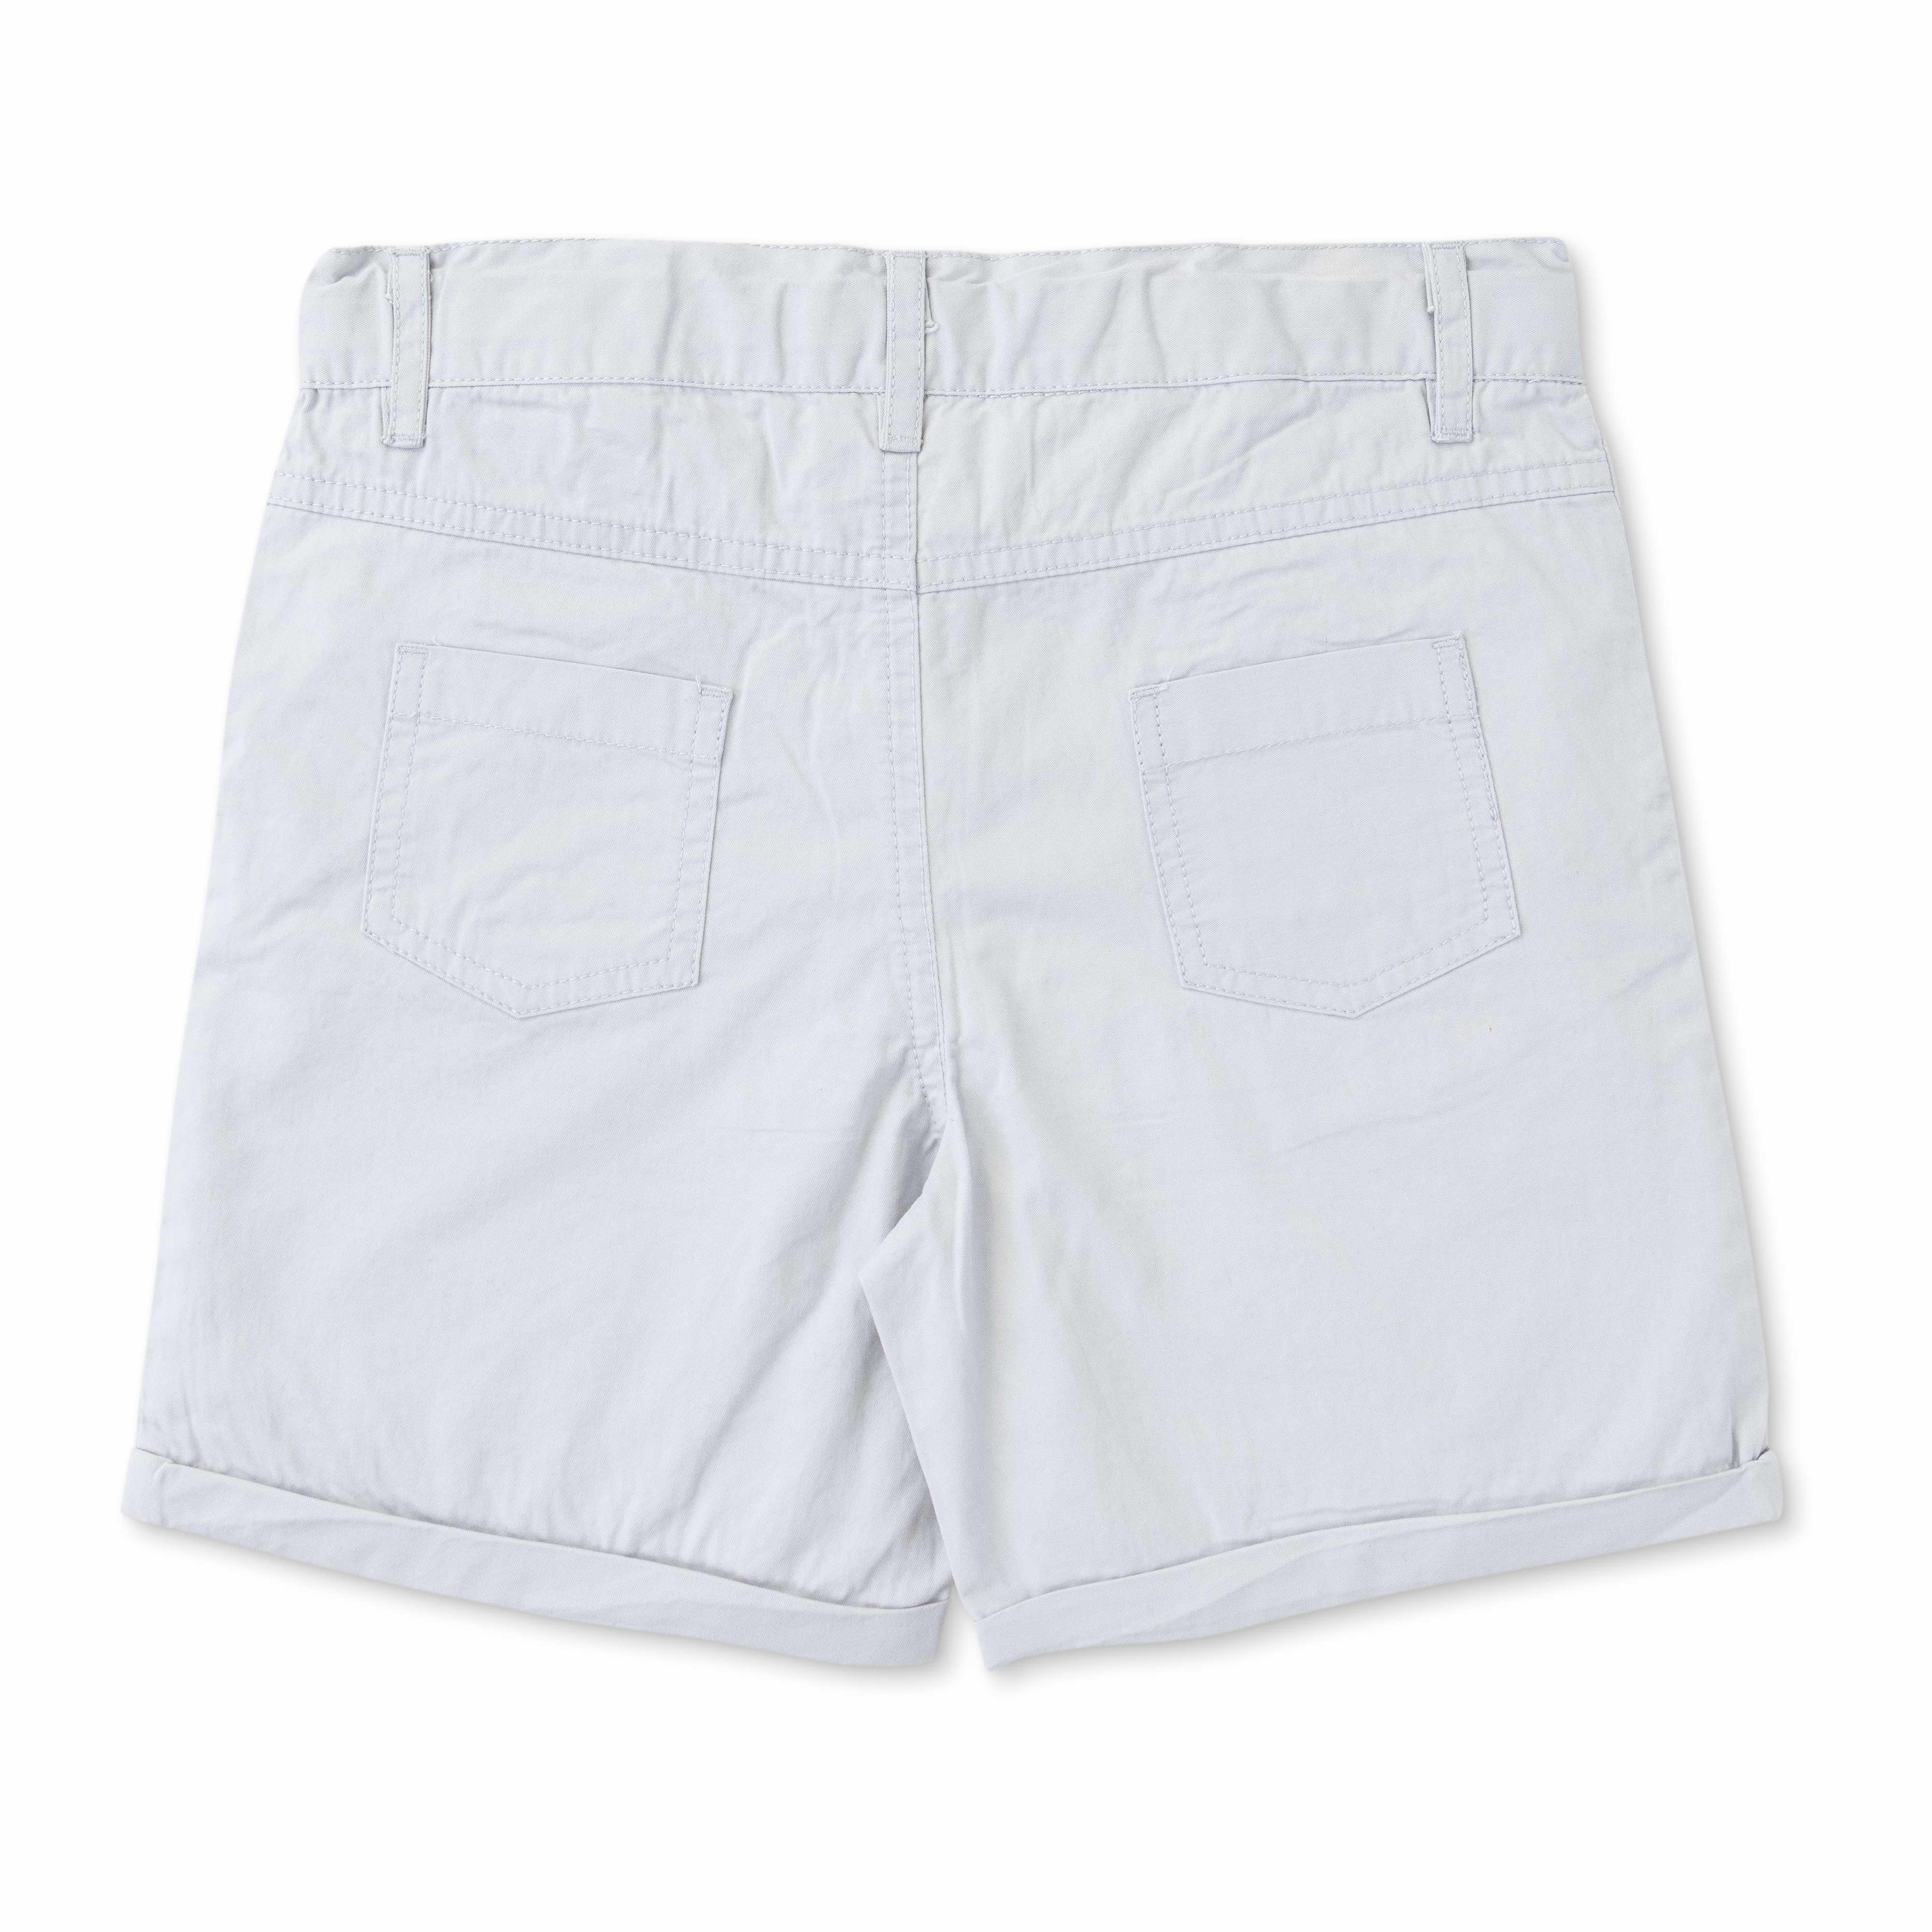 Boys Cotton Toddlers Solid Shorts - Grey - Juscubs